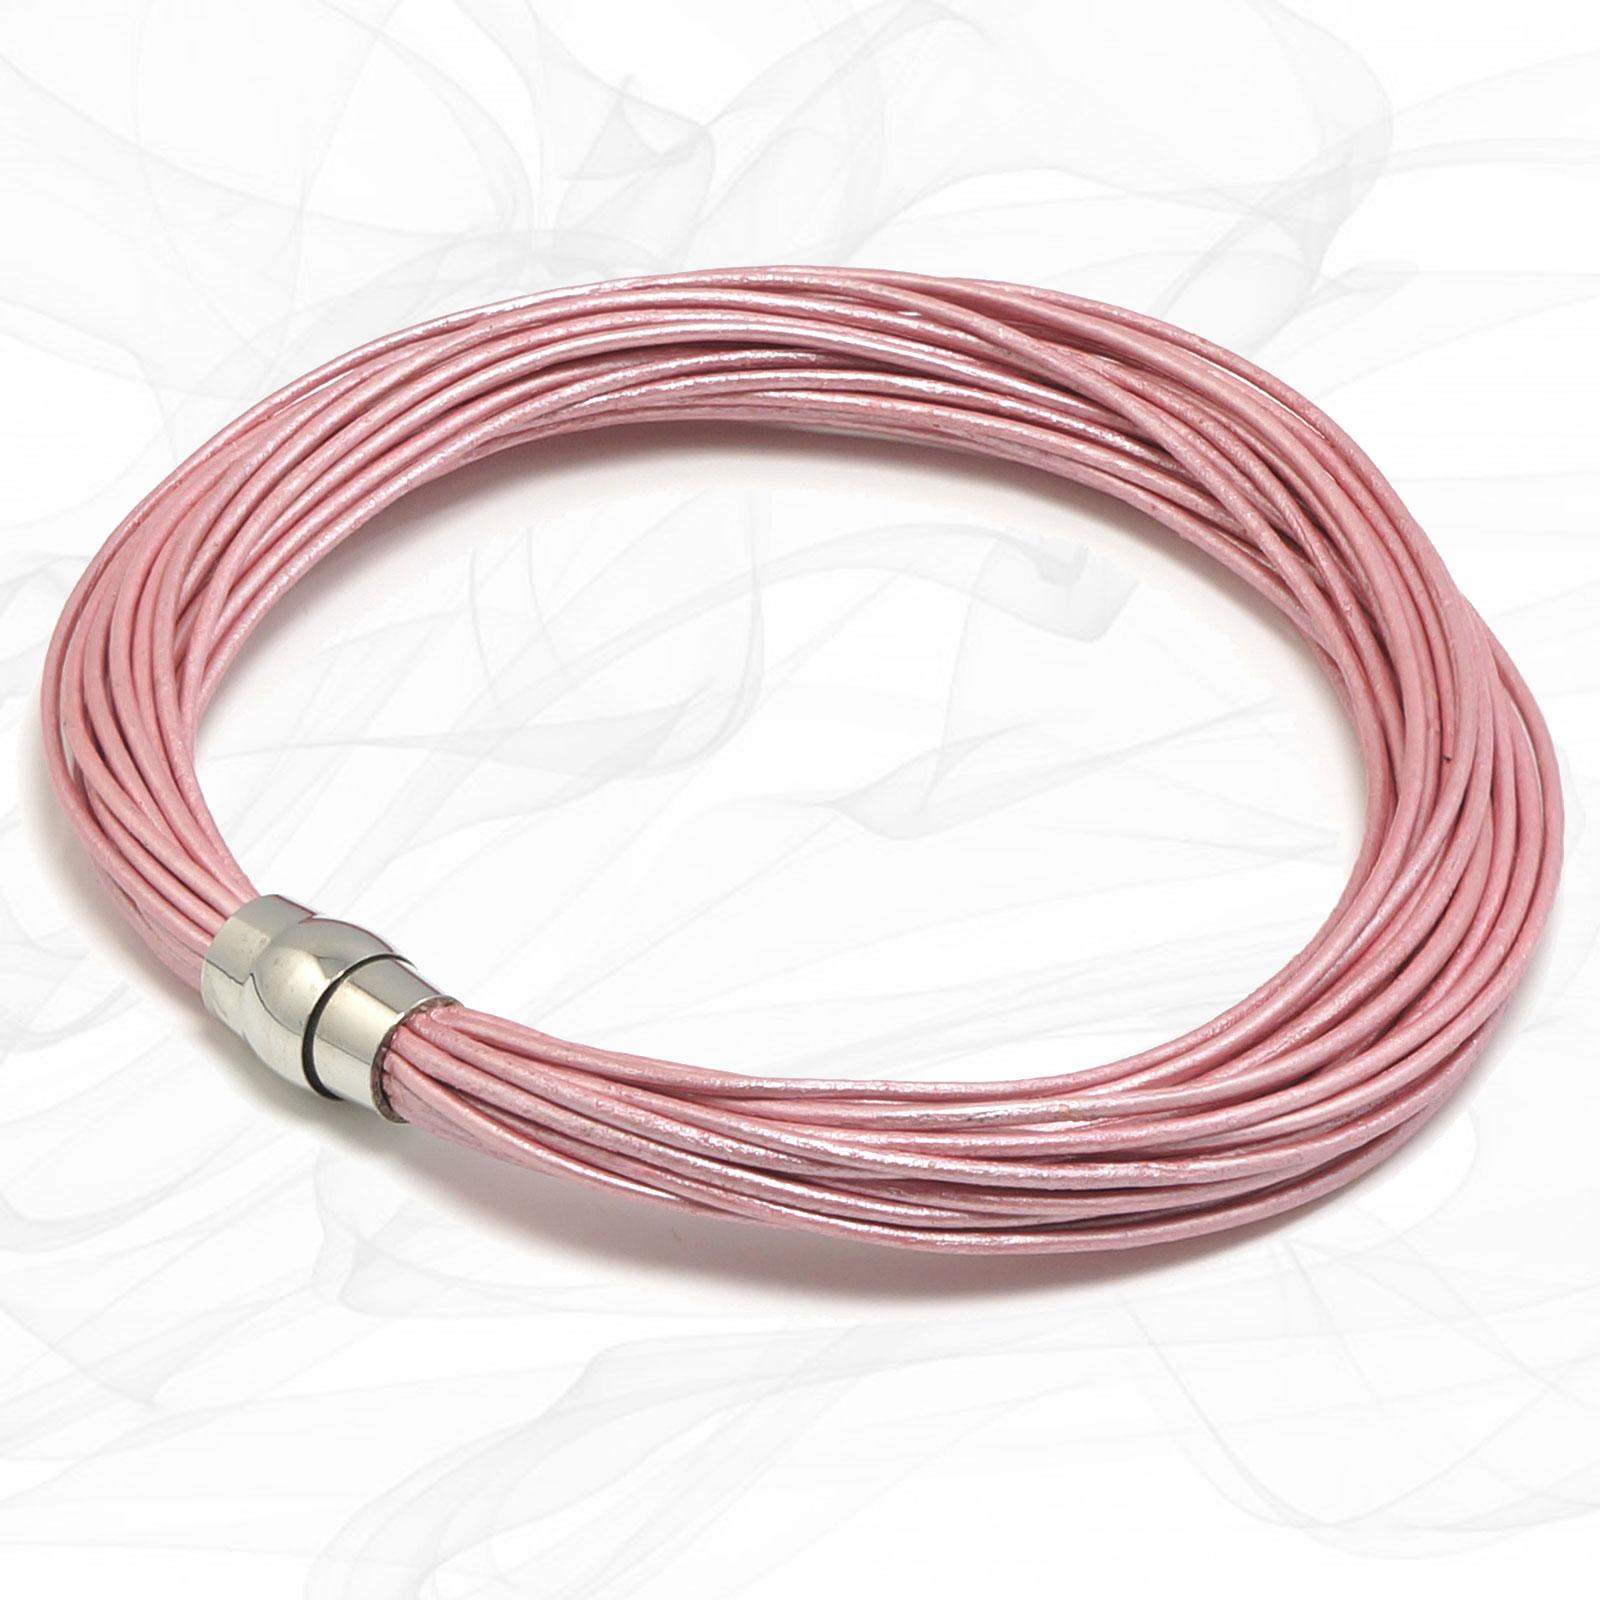 Pink Multi Strand Leather Bracelet for Women, one size, Limited Edition. With strong Magnetic Clasp.